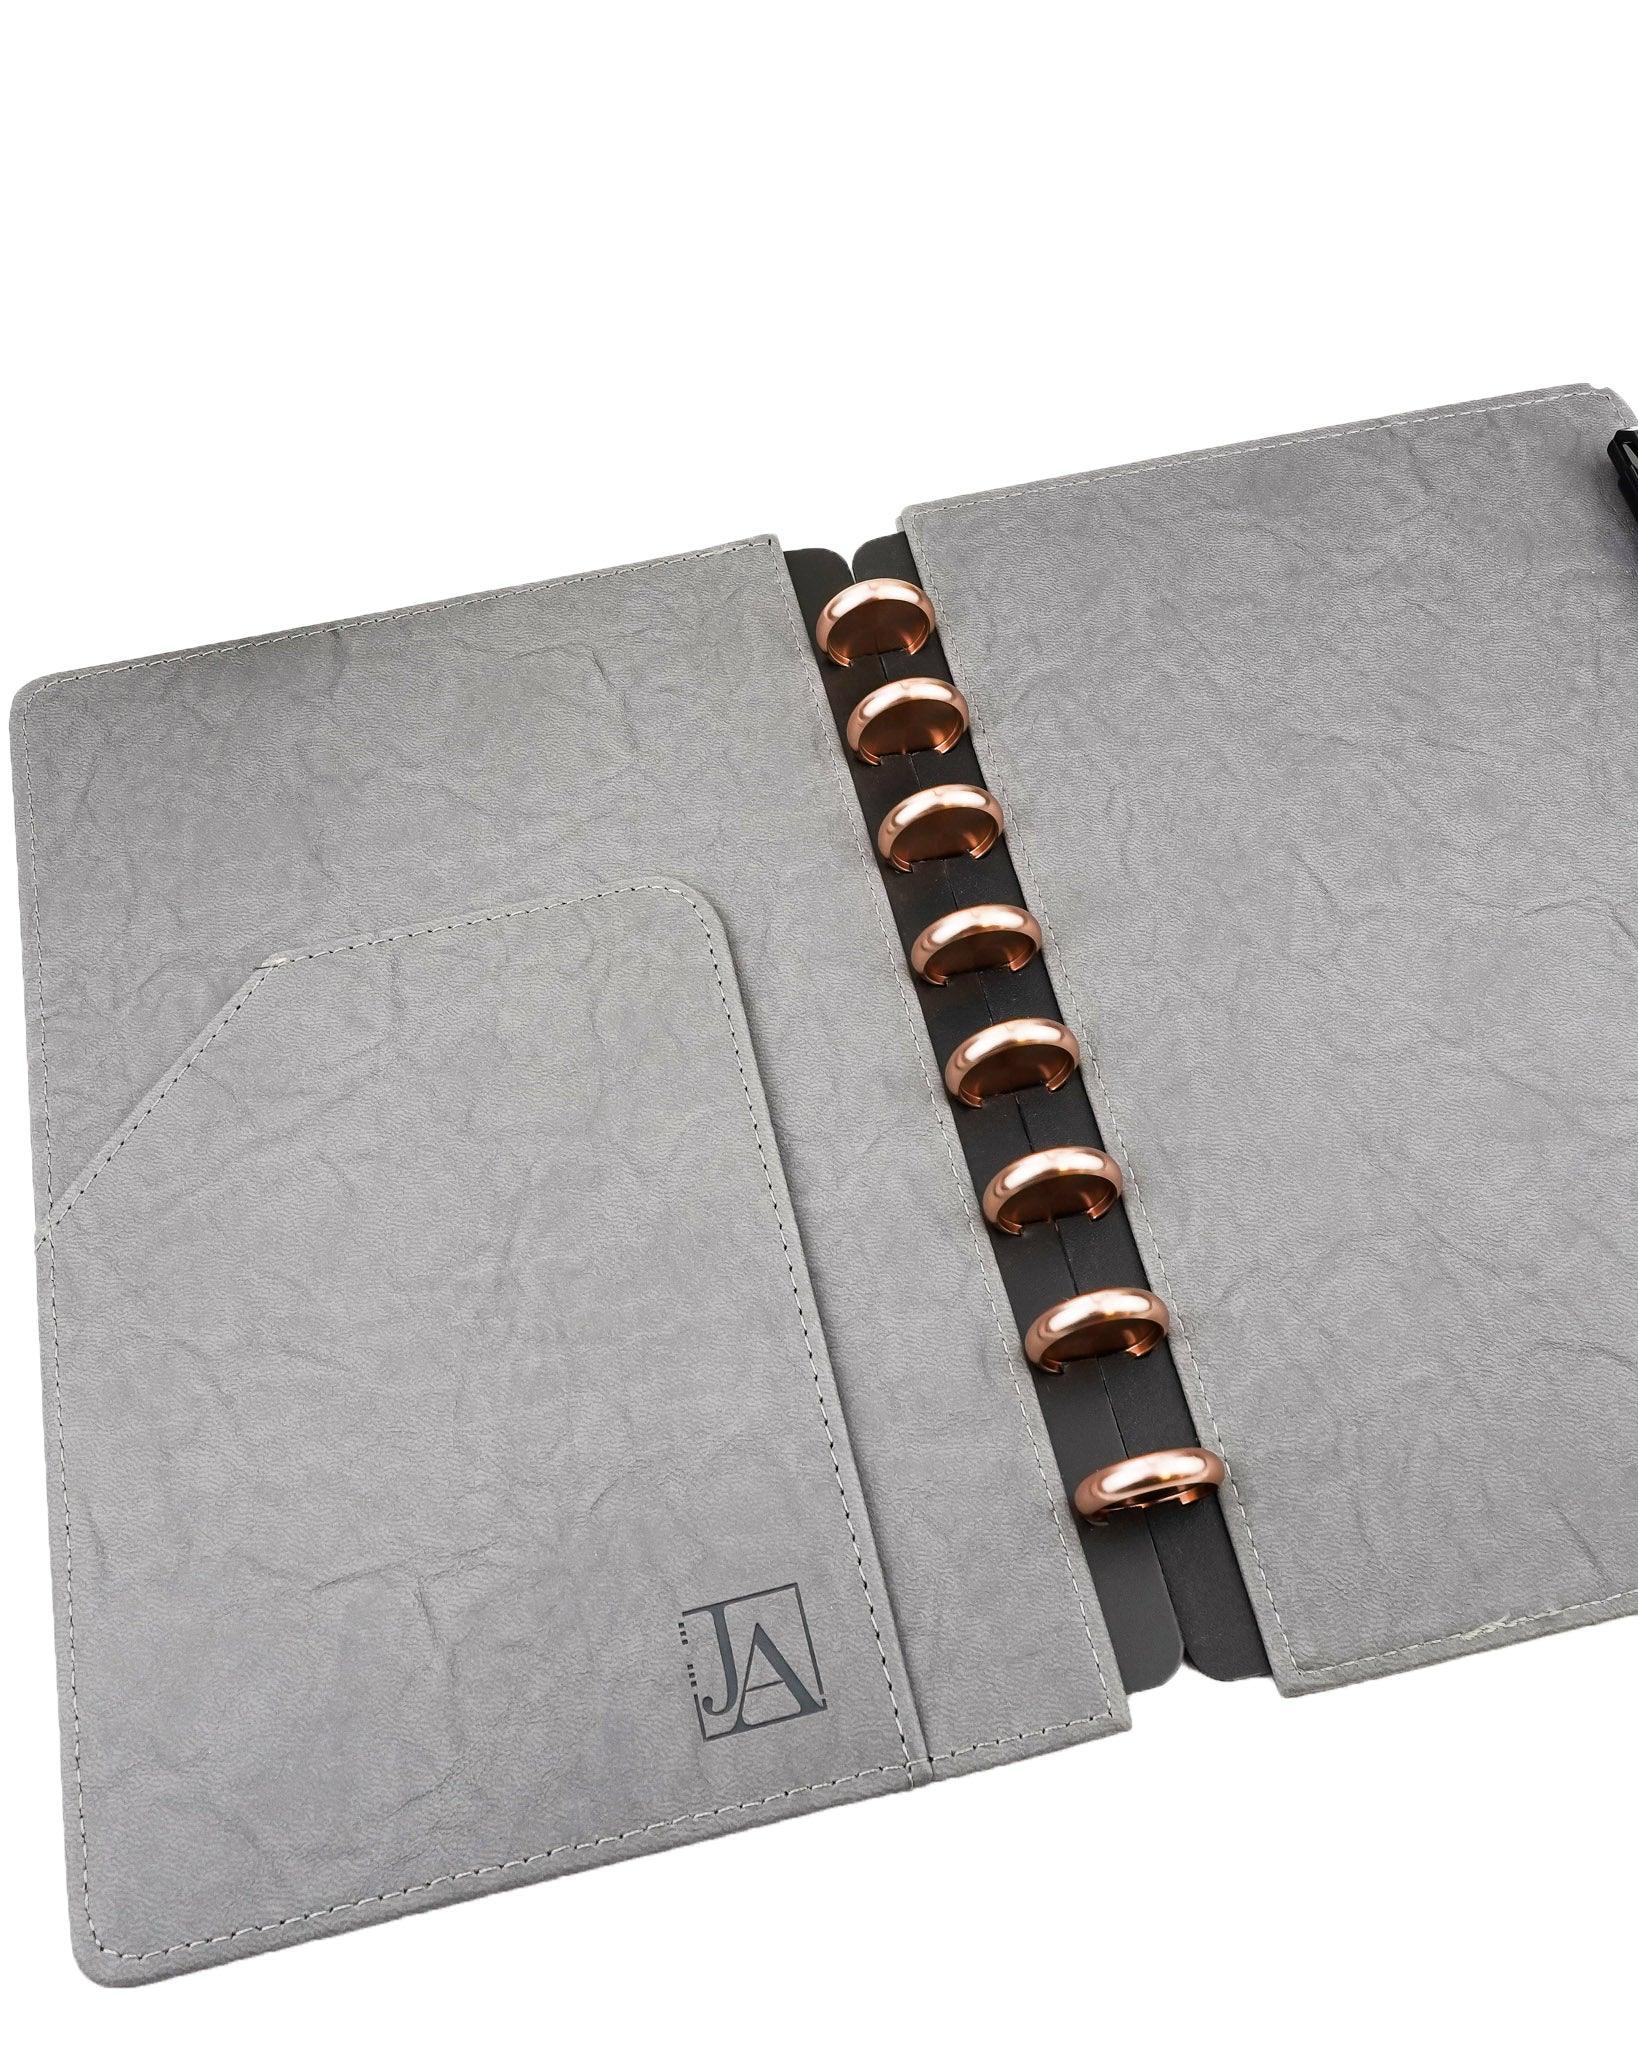 Vegan leather planner cover for discbound planner systems and discbound notebook systems by Jane's Agenda®.